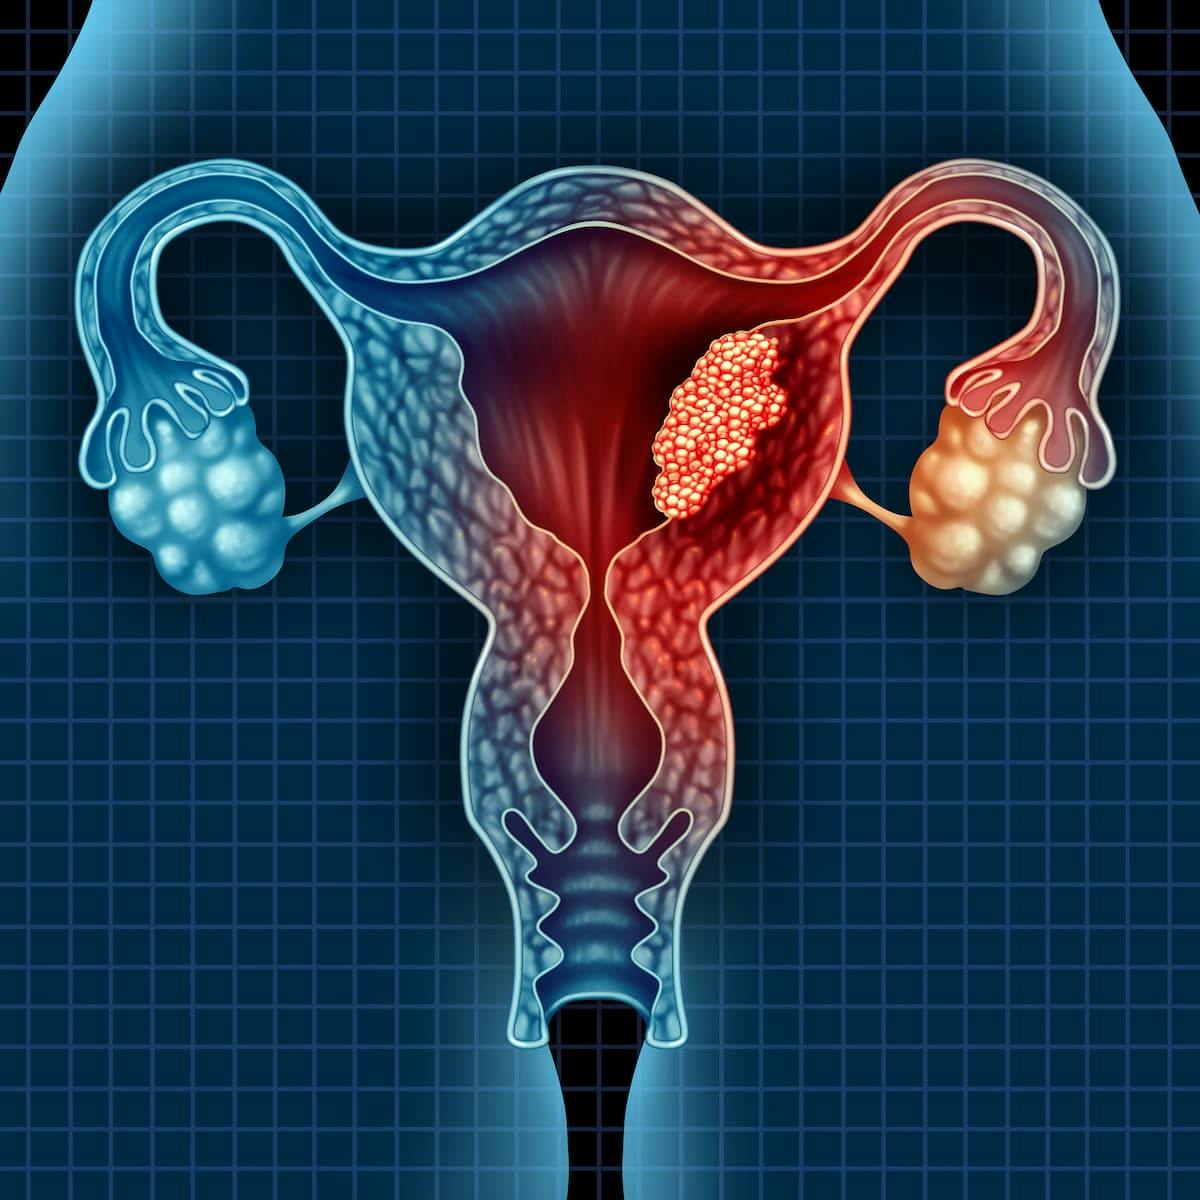 Cutting out radiotherapy appears to be safe while improving quality of life in patients with POLE-mutated endometrial cancer.